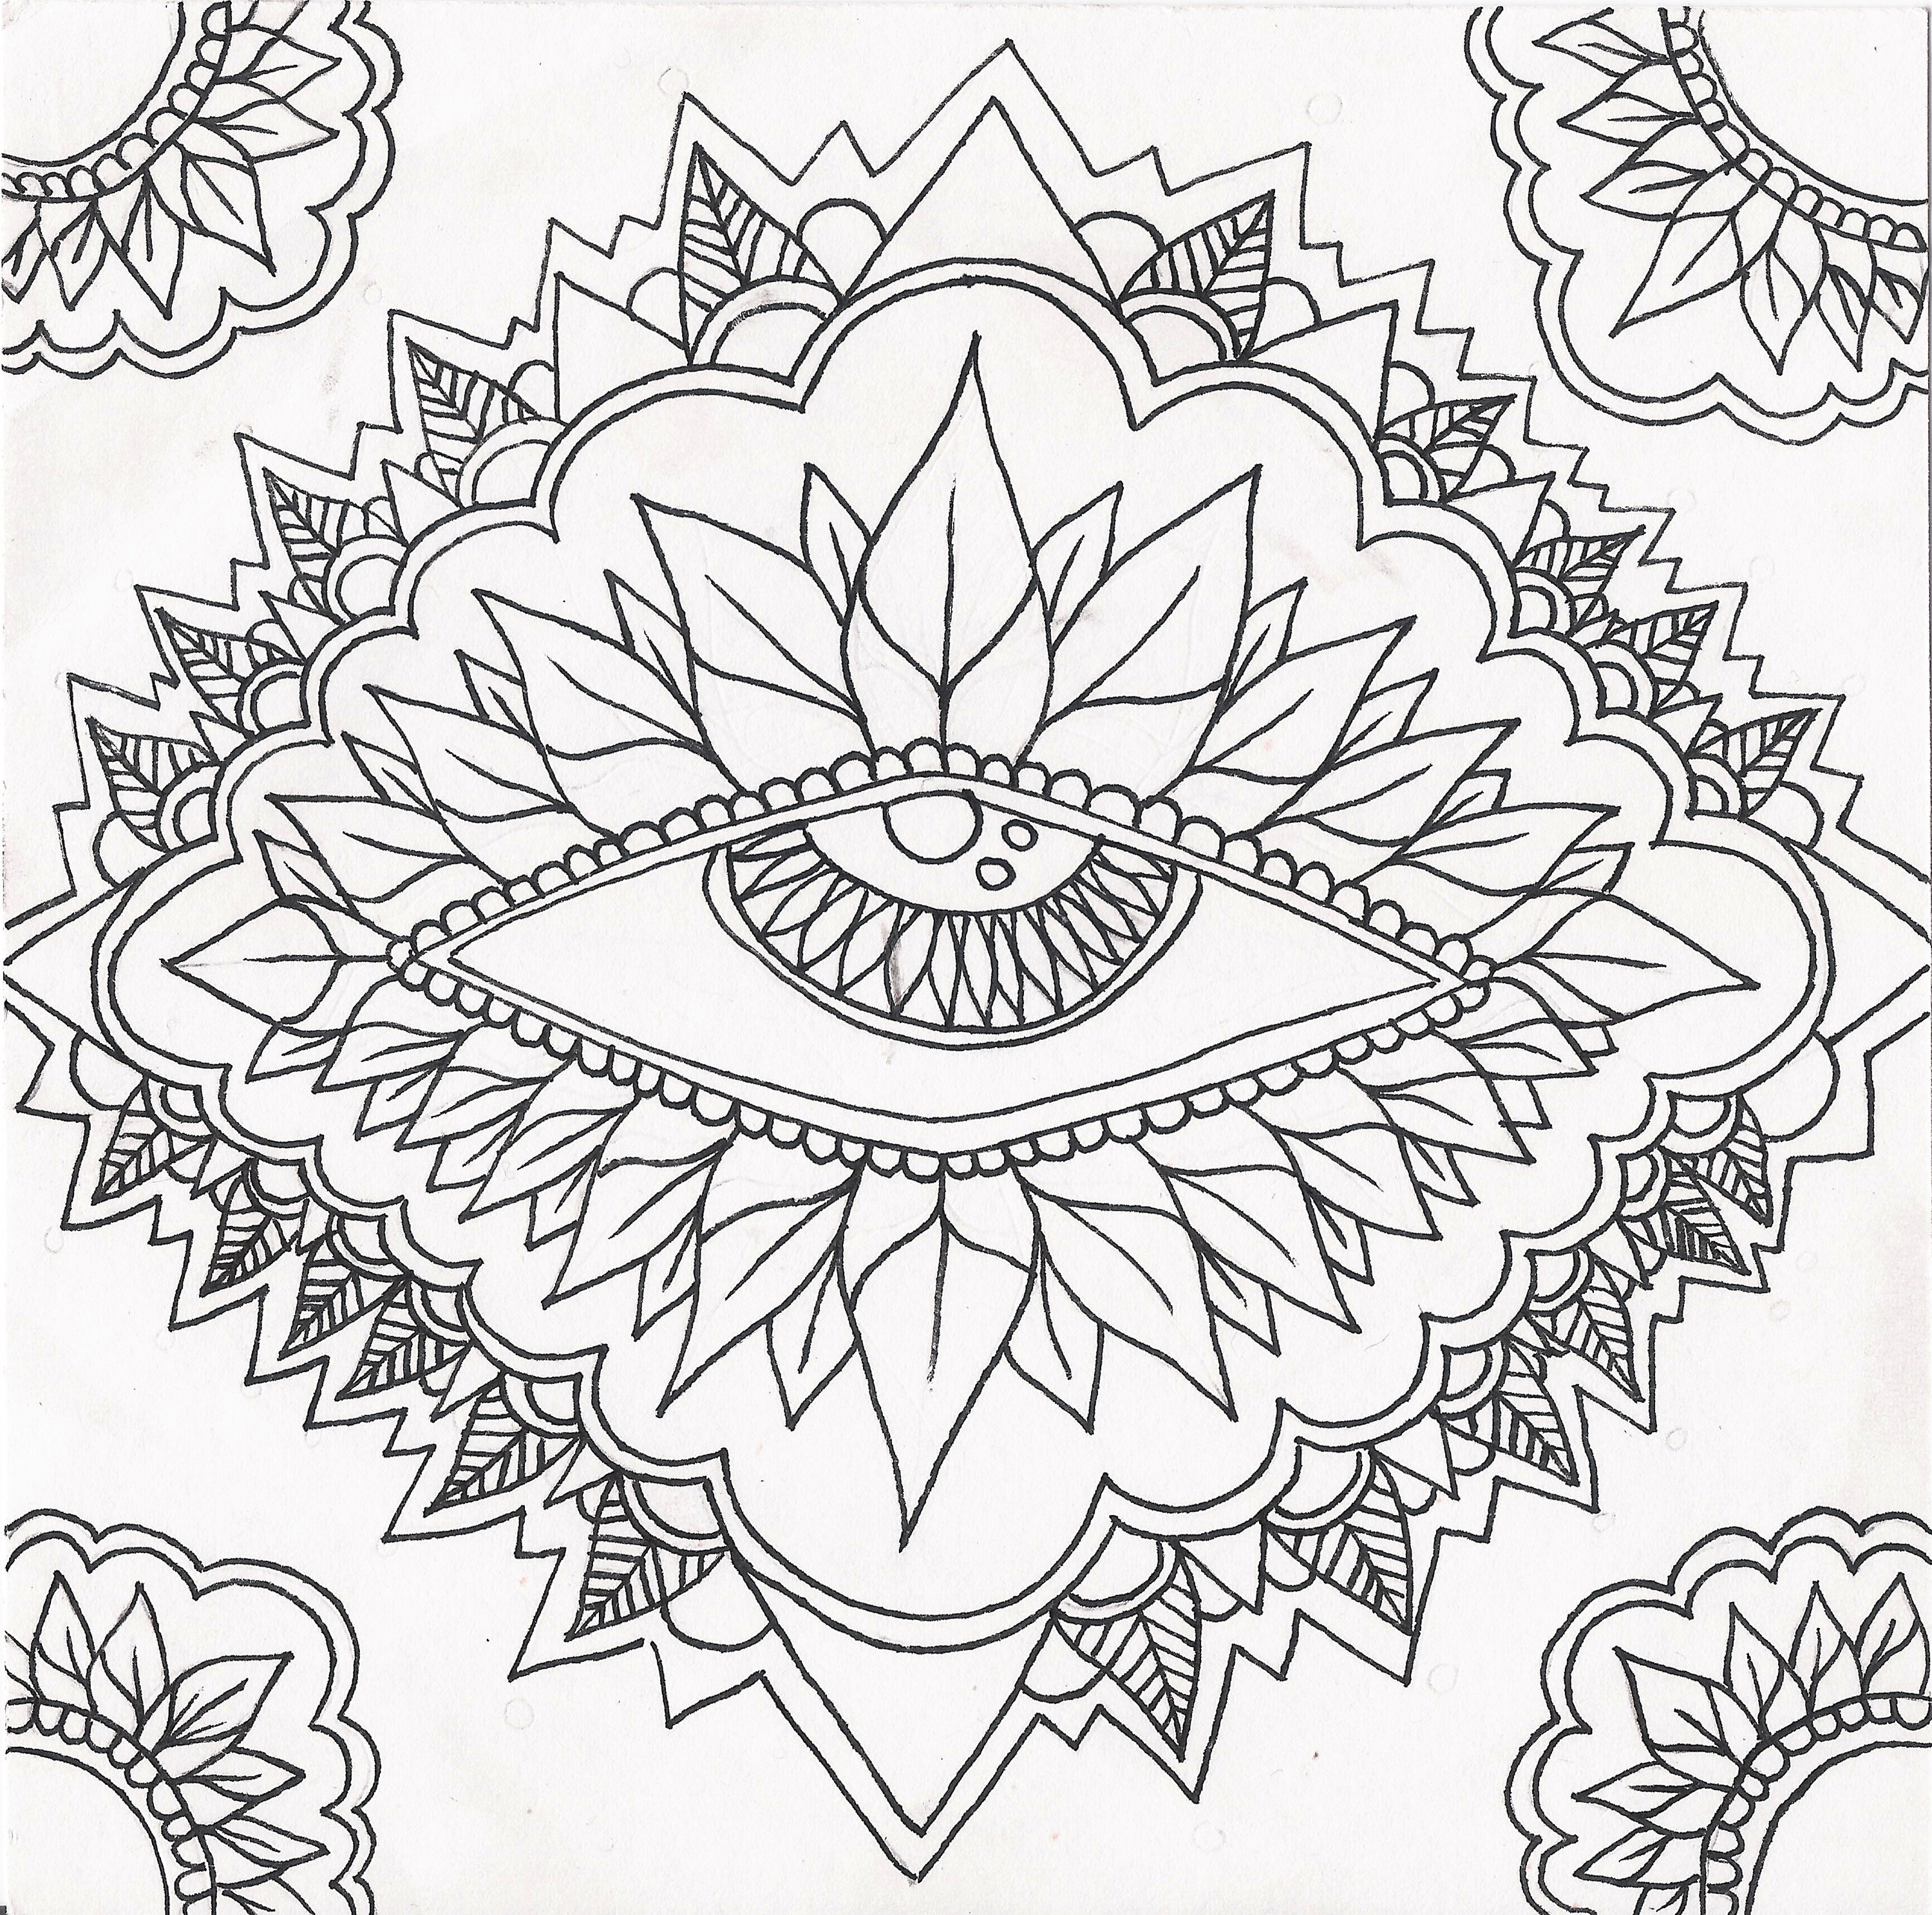 461 Cartoon Psychedelic Coloring Pages for Adult